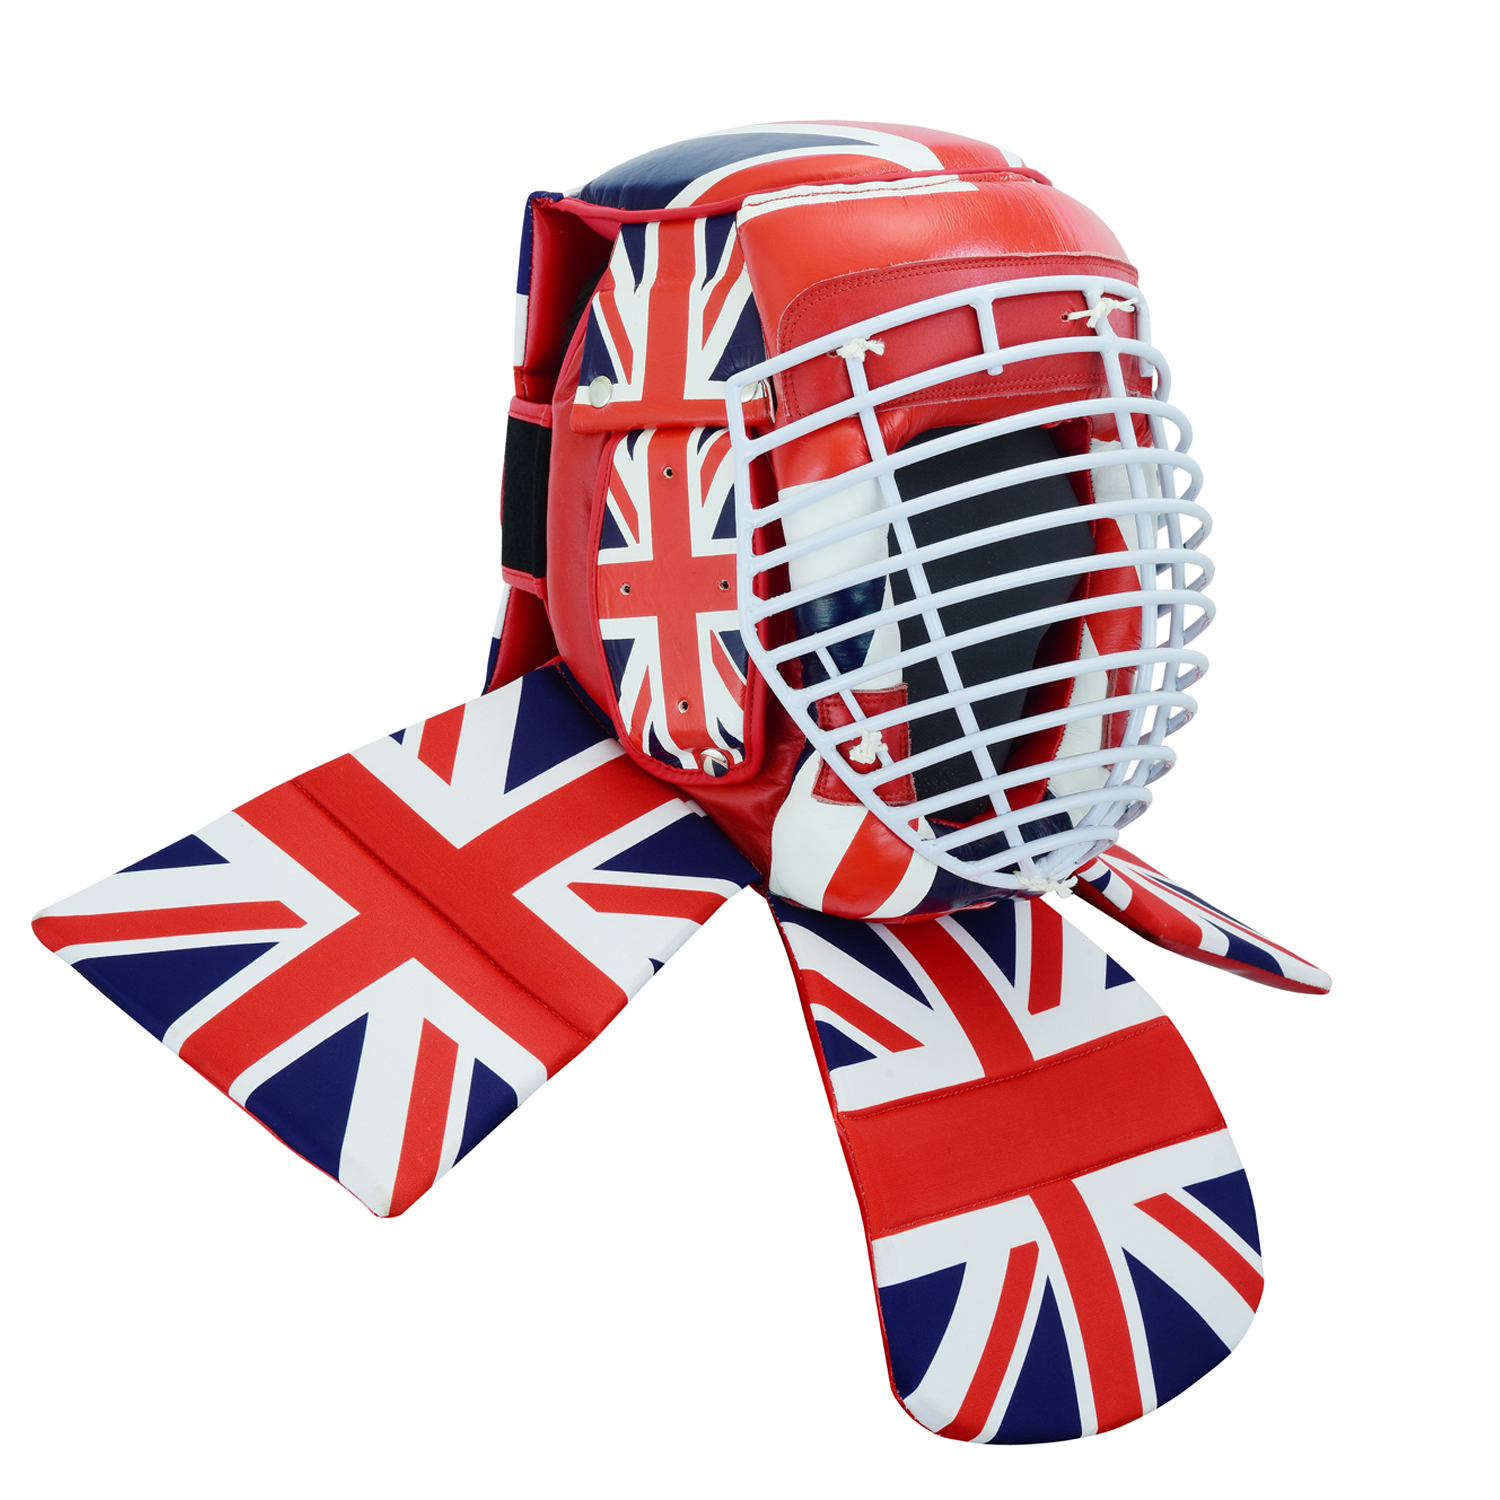 Full Contact Leather Competition Escrima Helmet - UK Flag - Click Image to Close